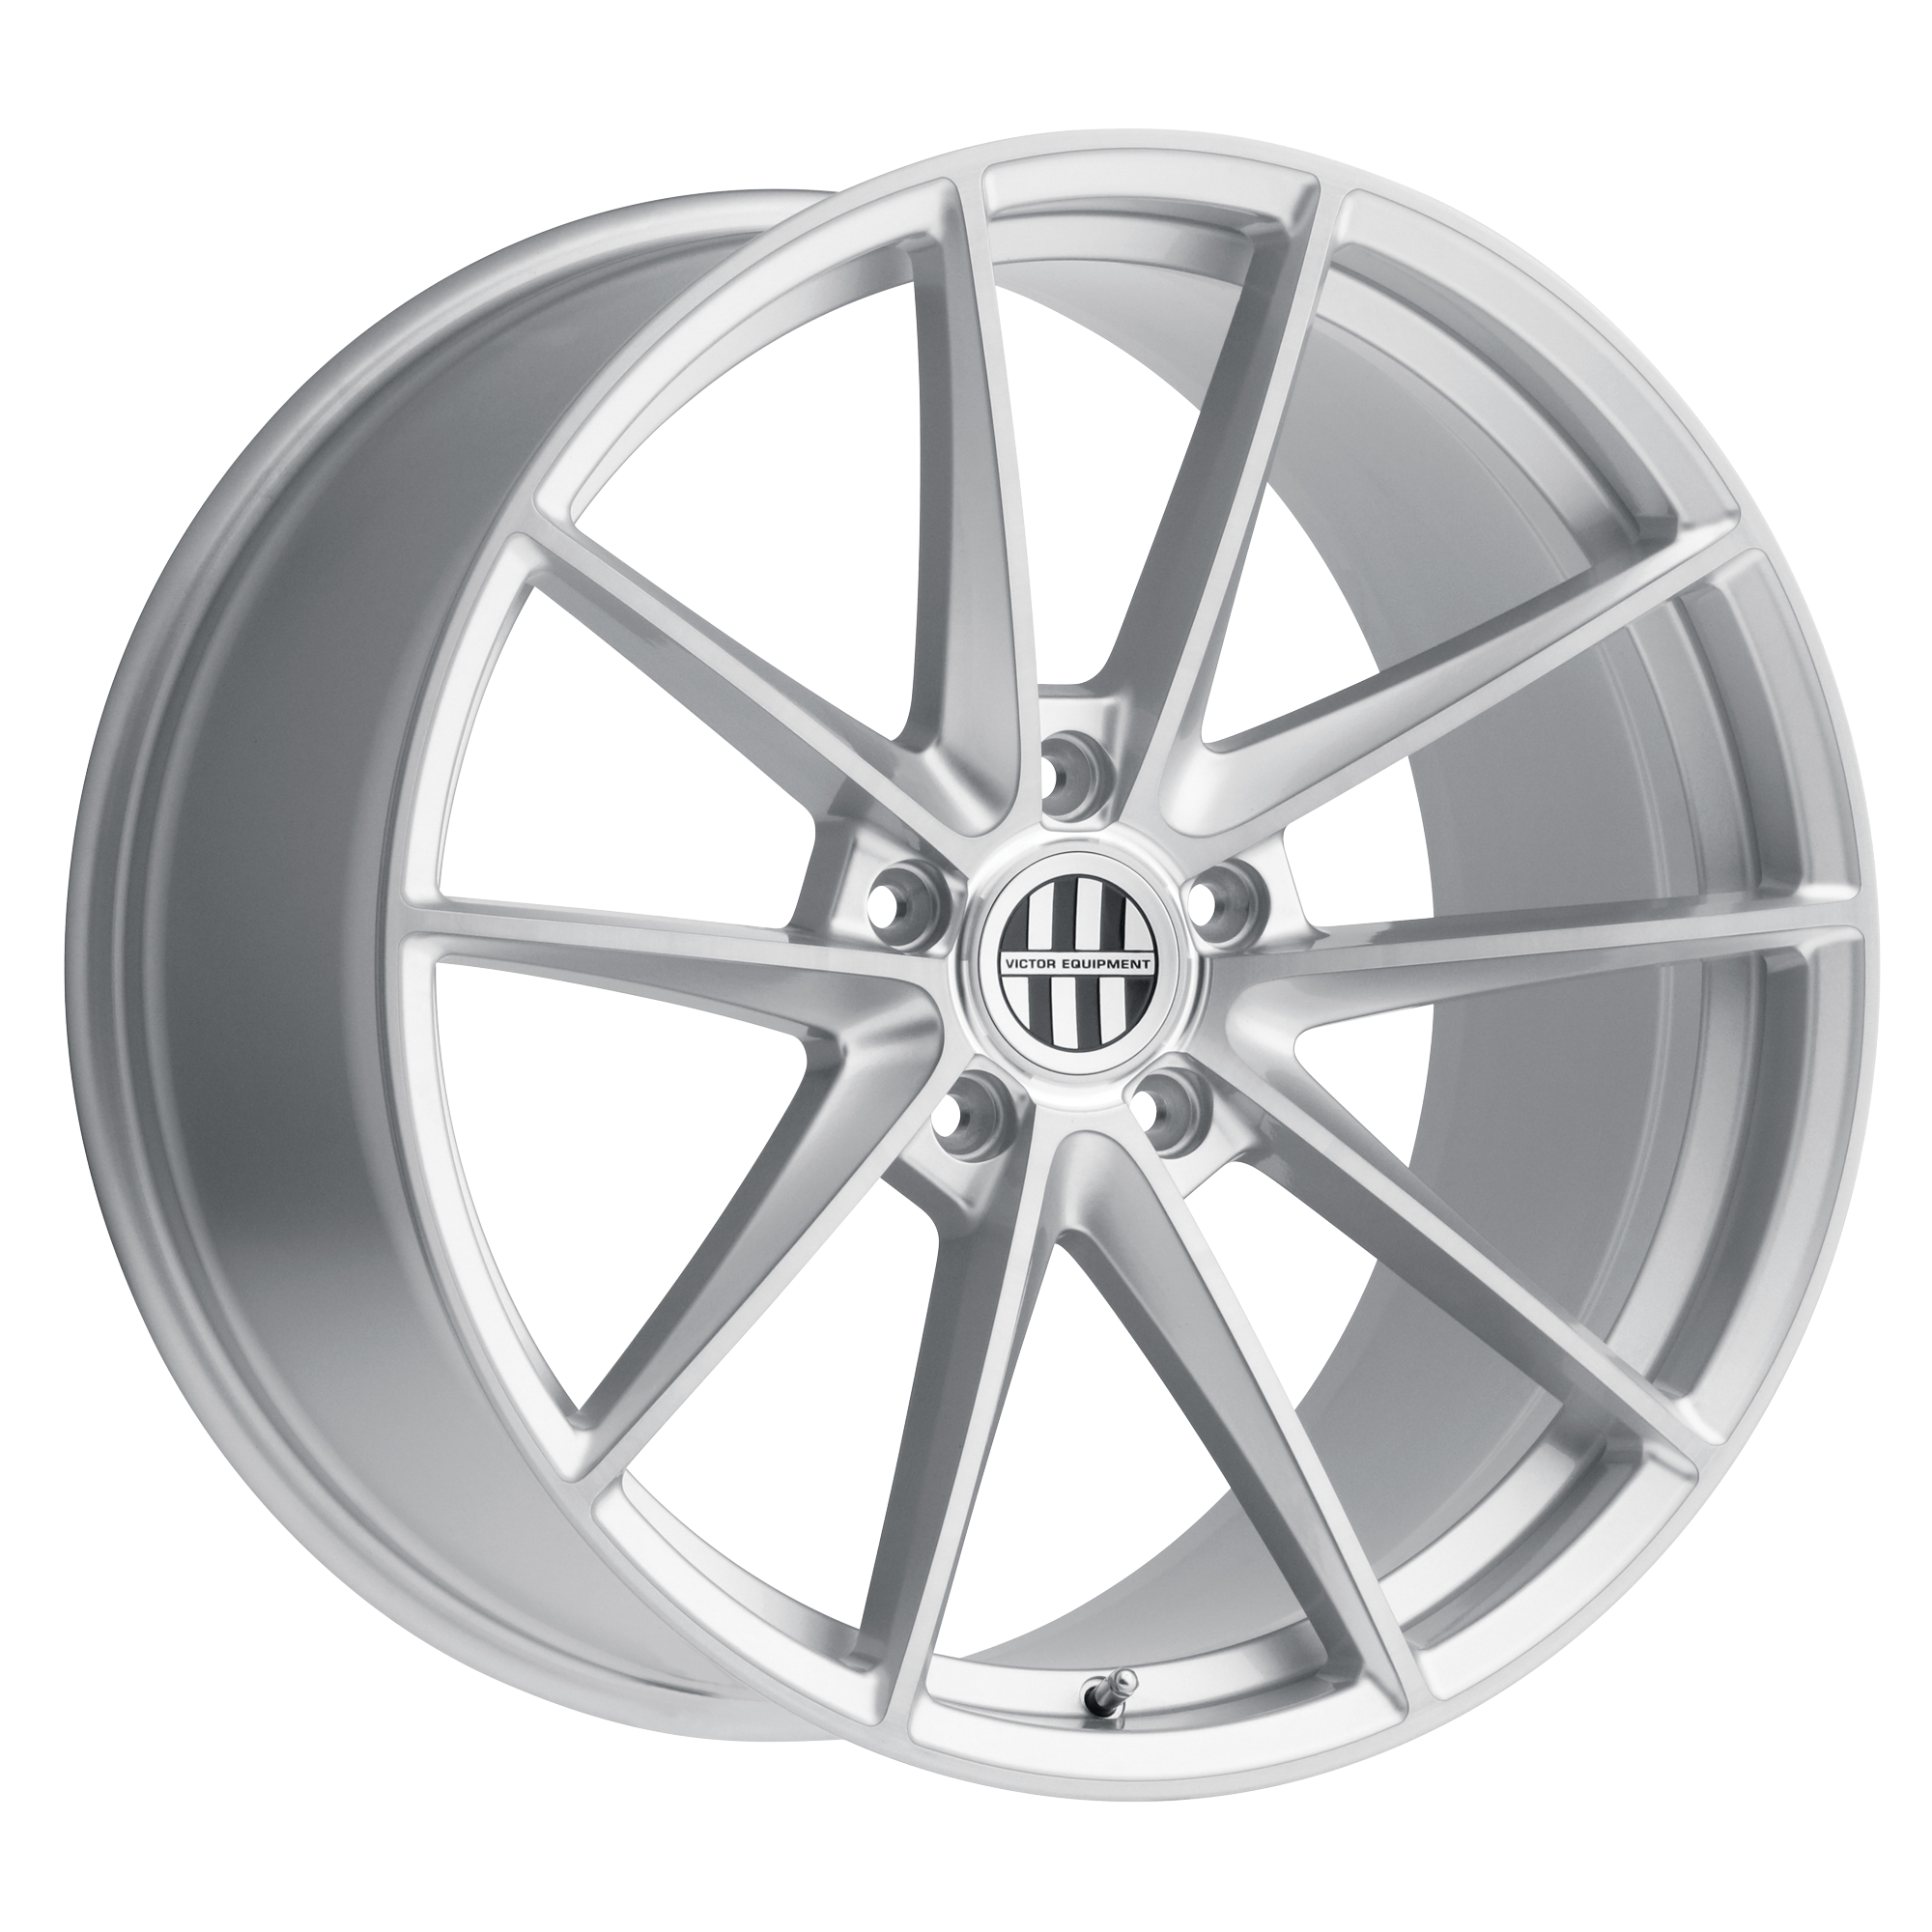 VICTOR EQUIPMENT ZUFFEN SILVER W/ BRUSHED FACE WHEELS | 18X10 | 5X130 | OFFSET: 50MM | CB: 71.5MM